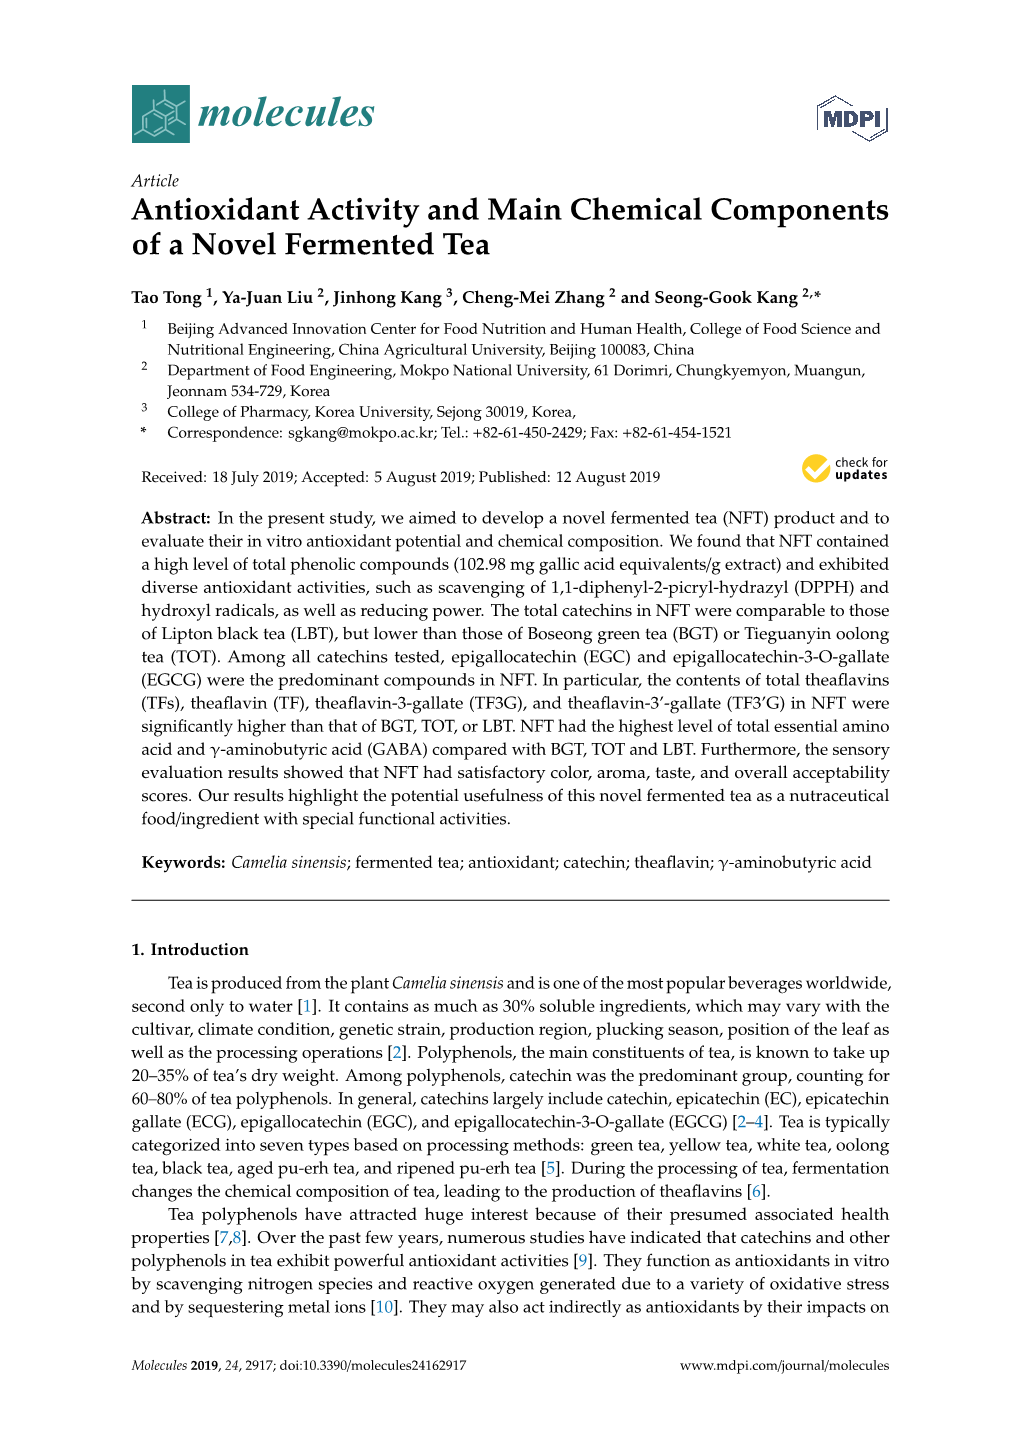 Antioxidant Activity and Main Chemical Components of a Novel Fermented Tea